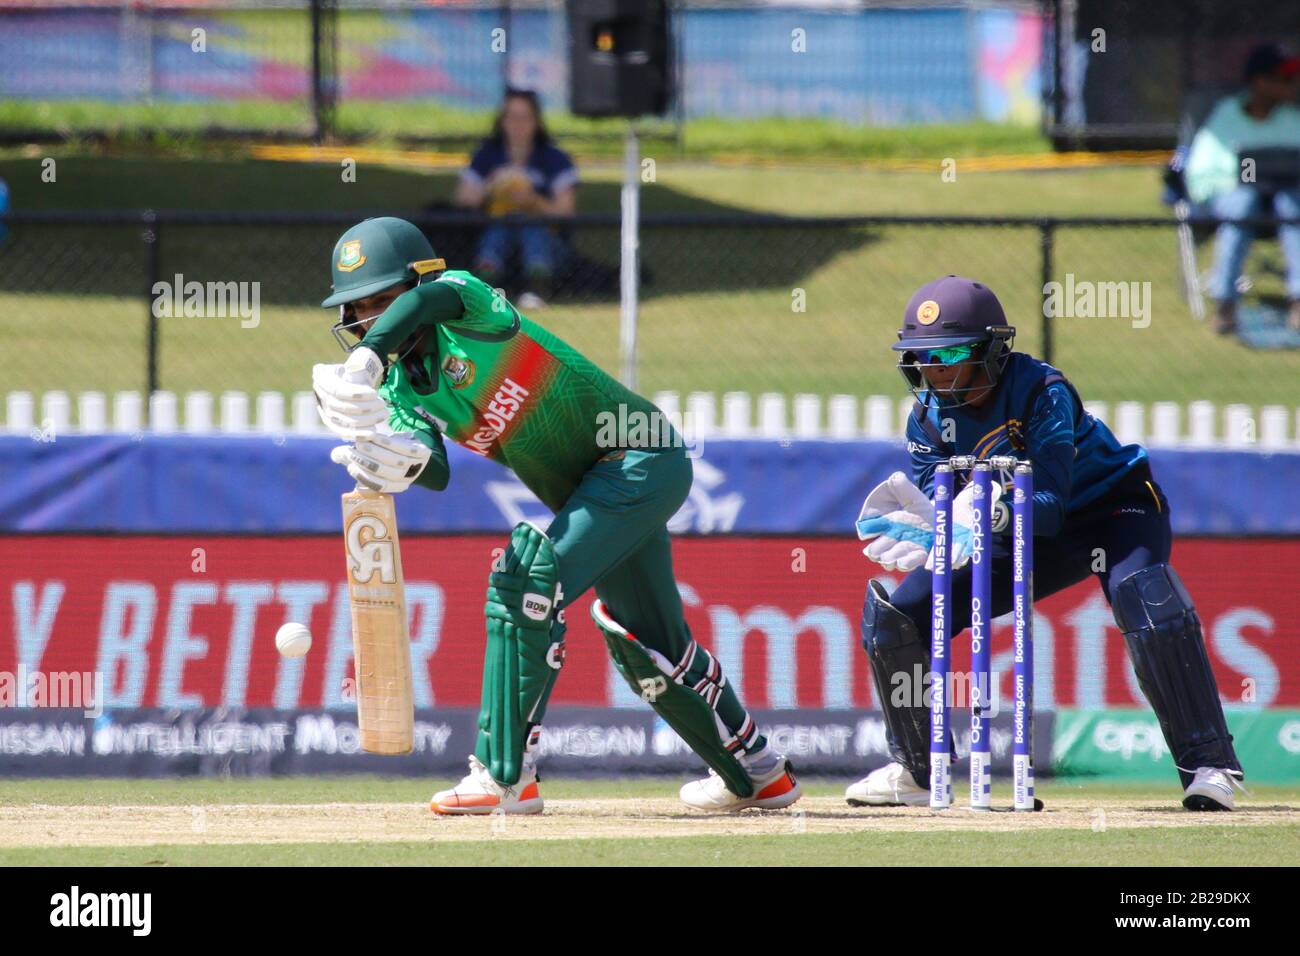 Junction Oval, Melbourne, Australia. 02nd Mar, 2020. ICC Womens T20 World Cup Game 17- Sri Lanka Women Playing Bangladesh Women-Bangladesh Player Nigar Sultana Joty Hits the ball During the Game - Image Credit: brett keating/Alamy Live News Stock Photo